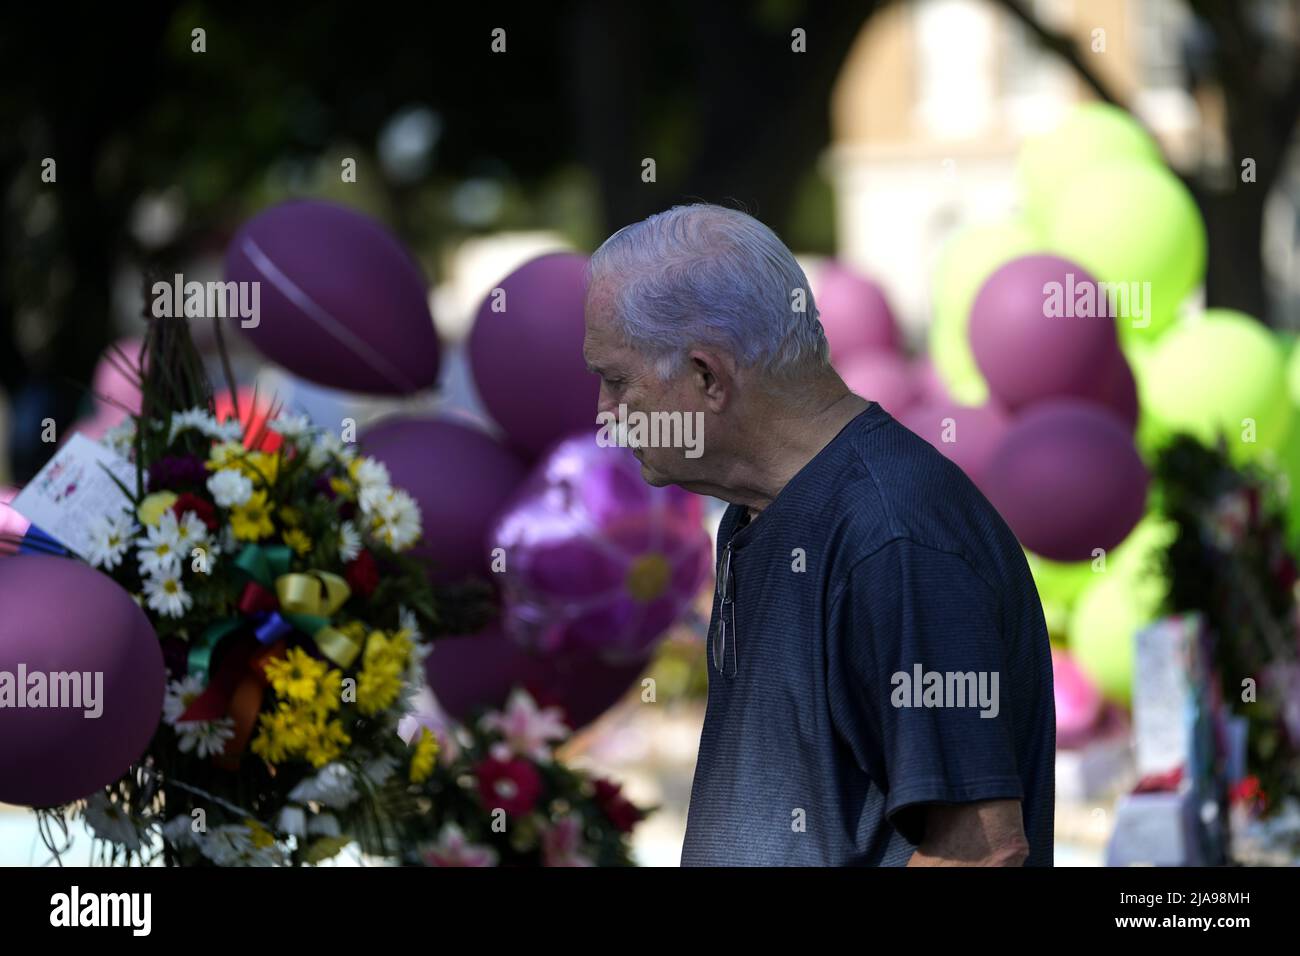 Uvalde, USA. 28th May, 2022. A man mourns for victims of a school mass shooting at Town Square in Uvalde, Texas, the United States, May 28, 2022. At least 19 children and two adults were killed in a shooting at Robb Elementary School in the town of Uvalde, Texas, on Tuesday. Credit: Wu Xiaoling/Xinhua/Alamy Live News Stock Photo